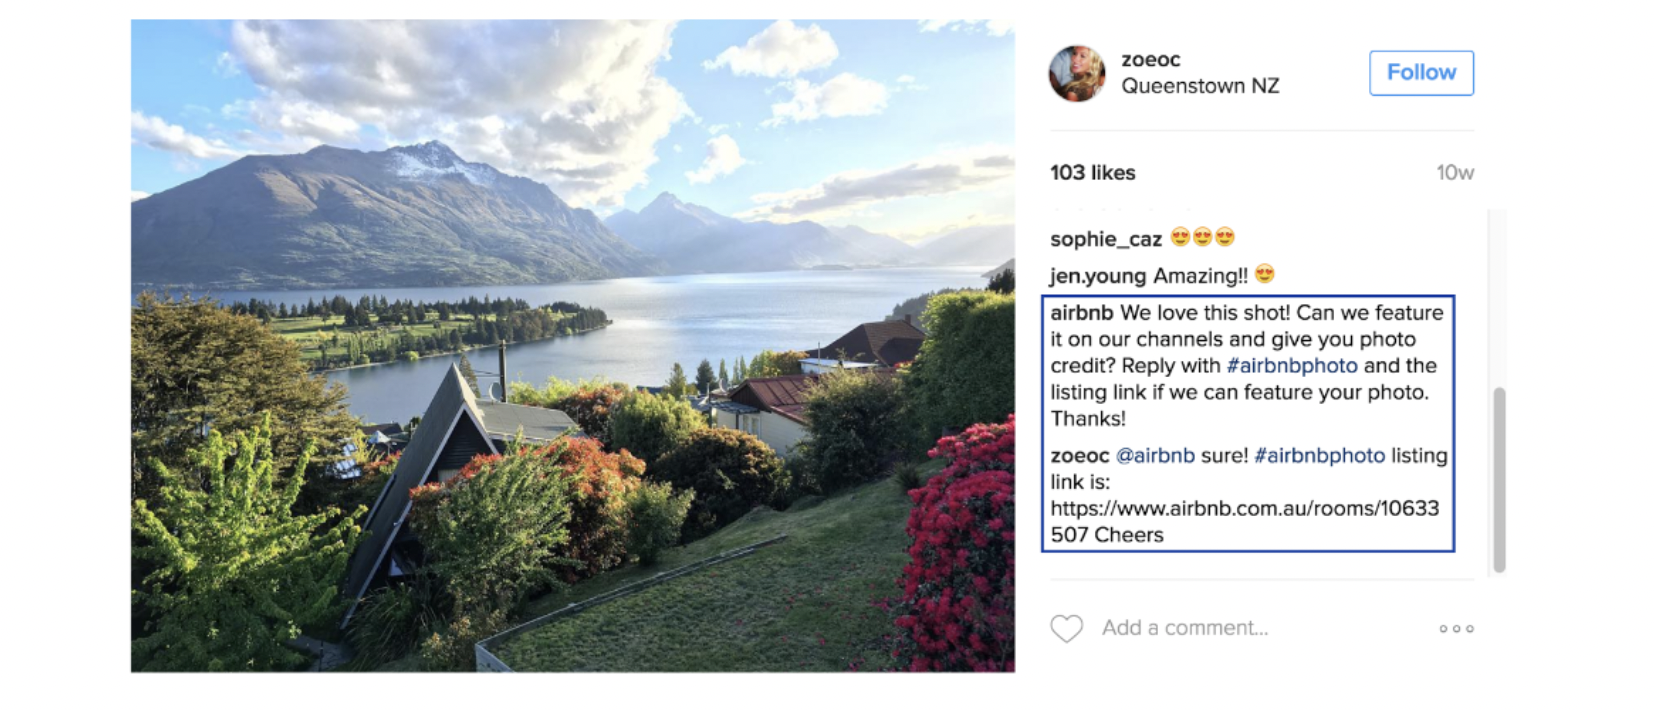 An Instagram post from Airbnb showcases how the brand incorporates  user-generated content strategy to engage customers.